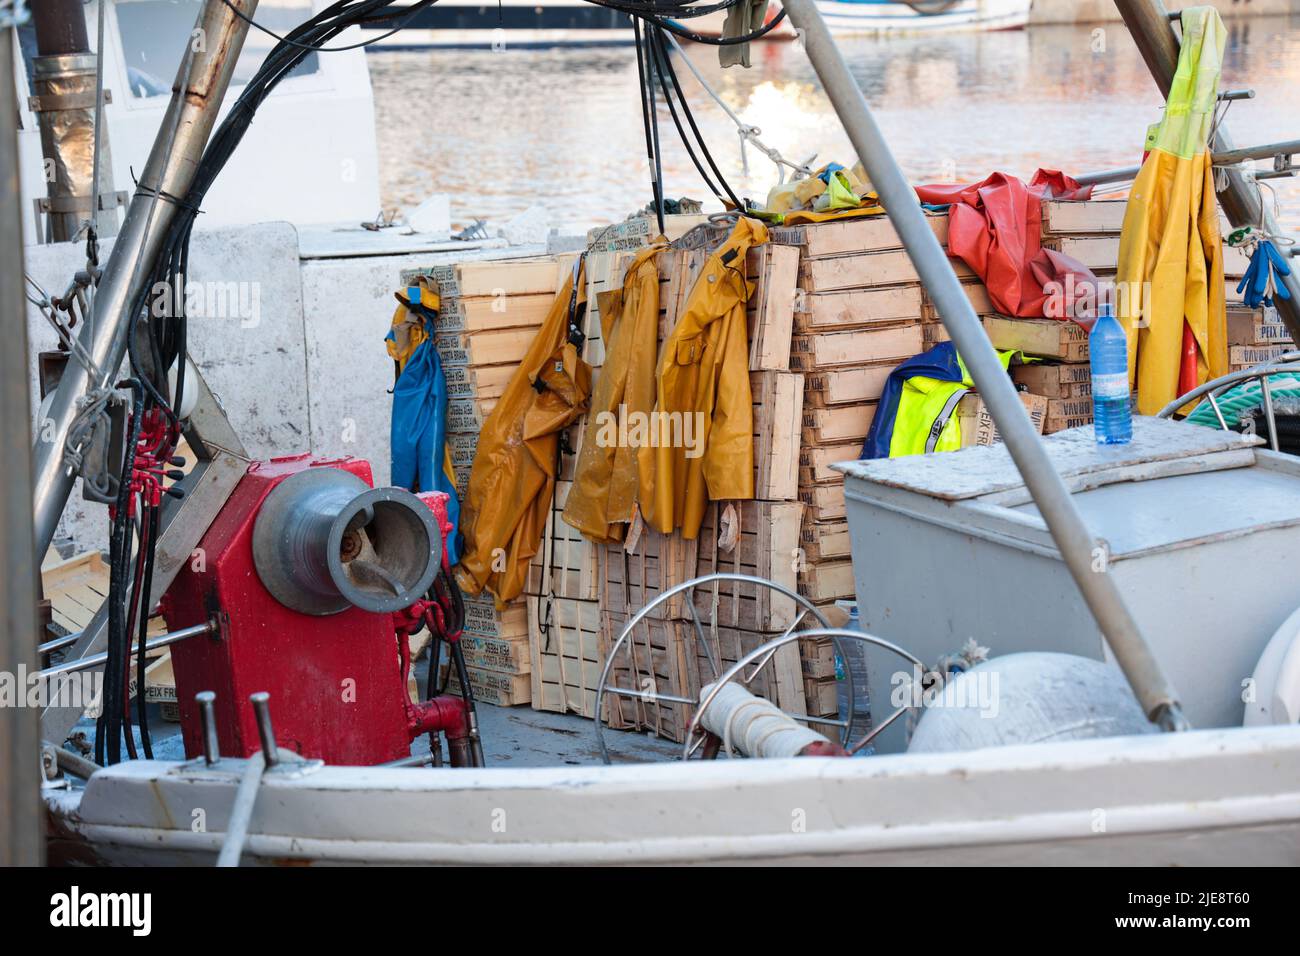 https://c8.alamy.com/comp/2JE8T60/fishermans-yellow-protective-waterproof-clothing-being-left-to-dry-on-a-commercial-fishing-vessel-in-catalonia-spain-2JE8T60.jpg